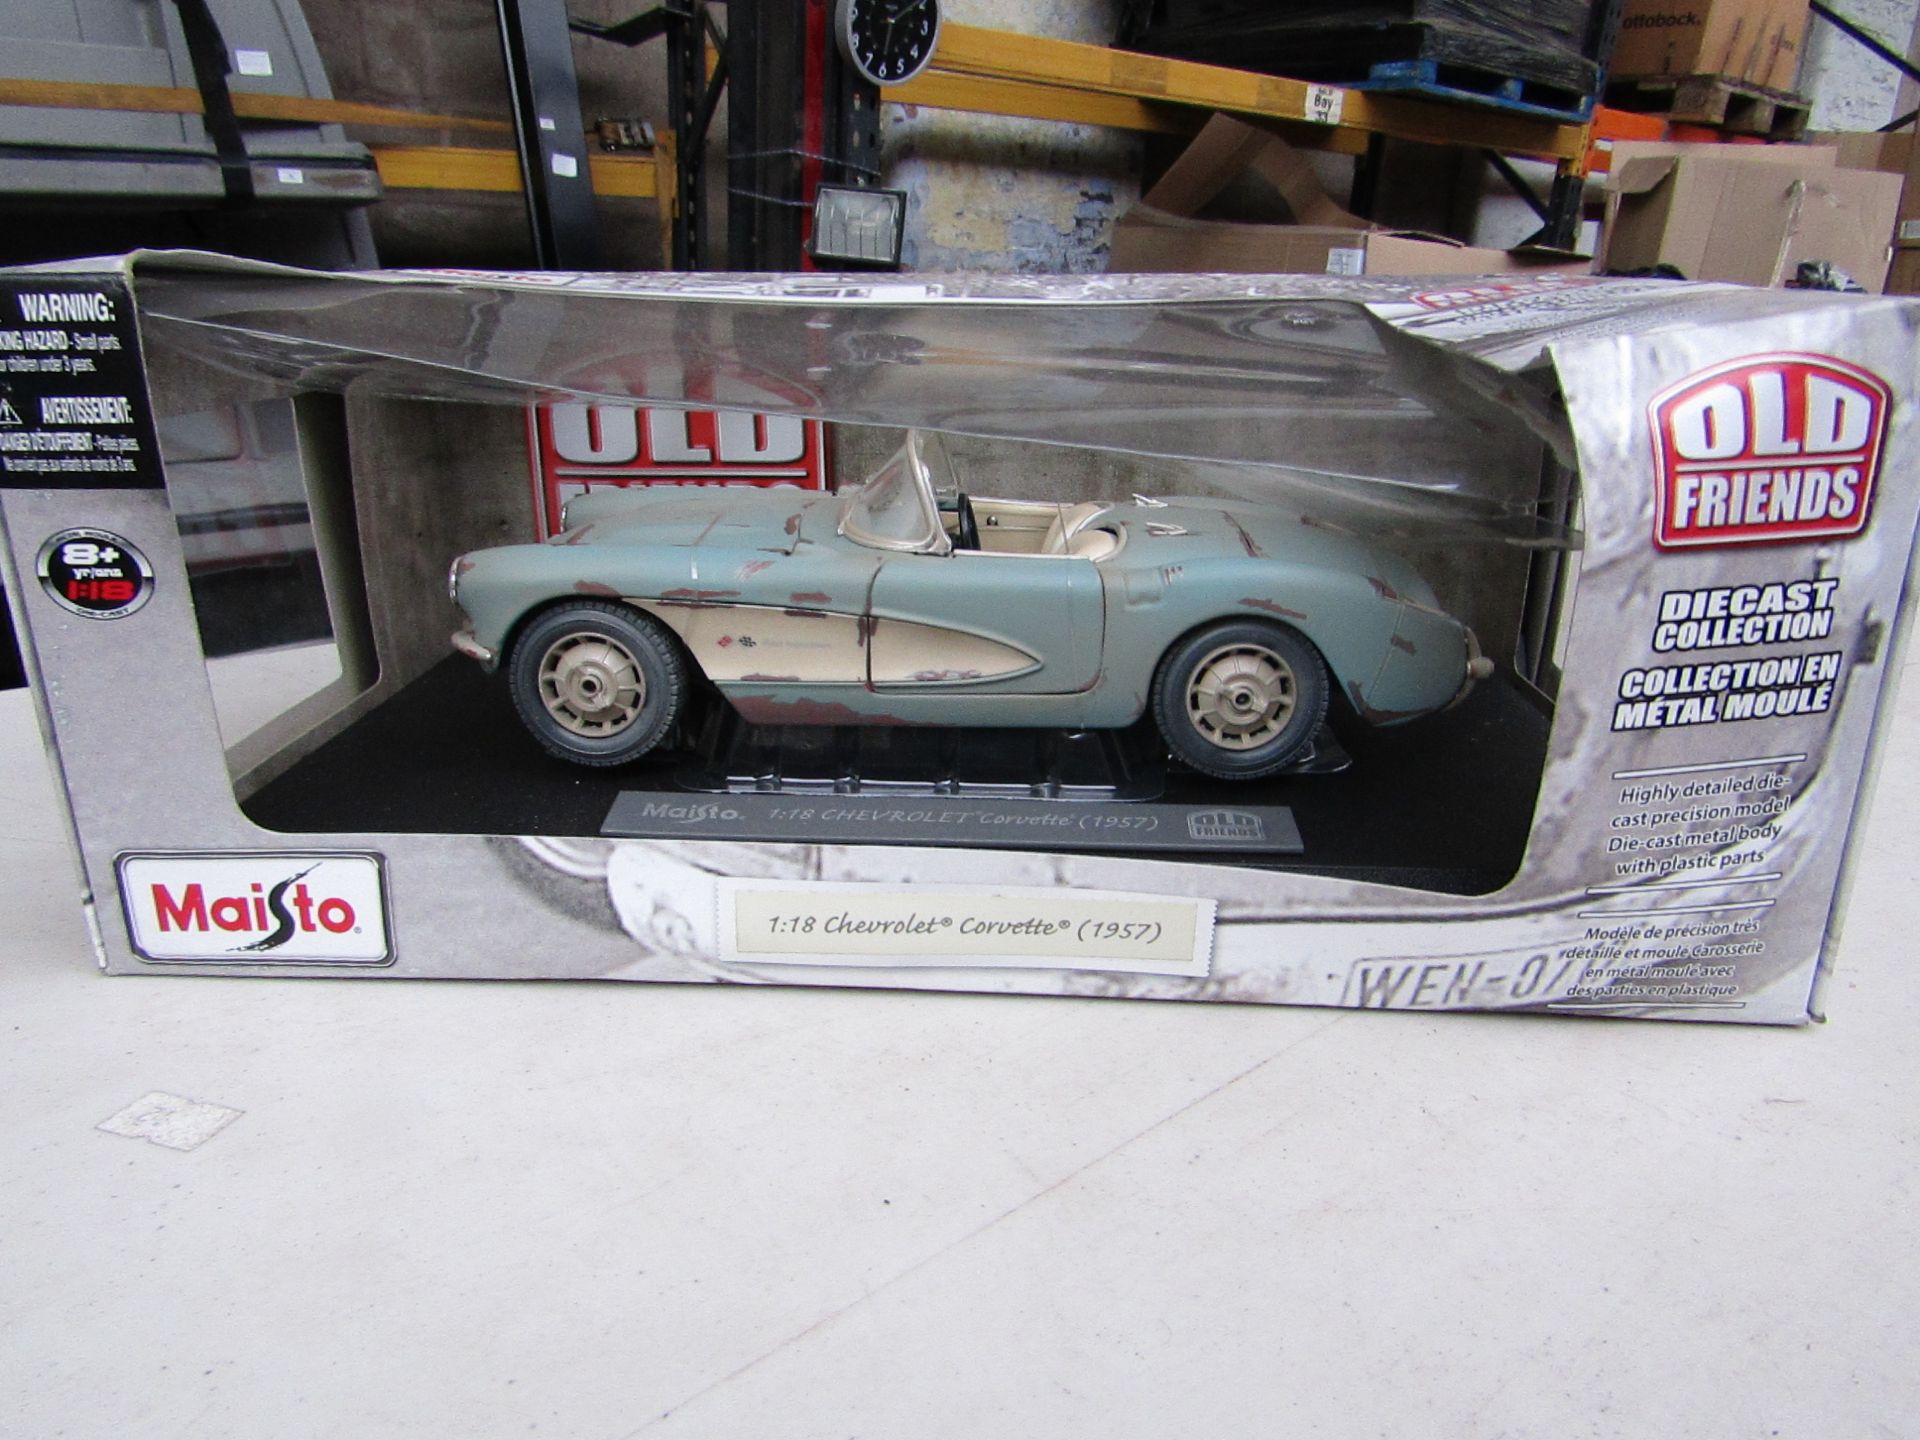 Maisto Old friends 1:18 scale model of a 1957 Chevrolet Corvette, in original packaging